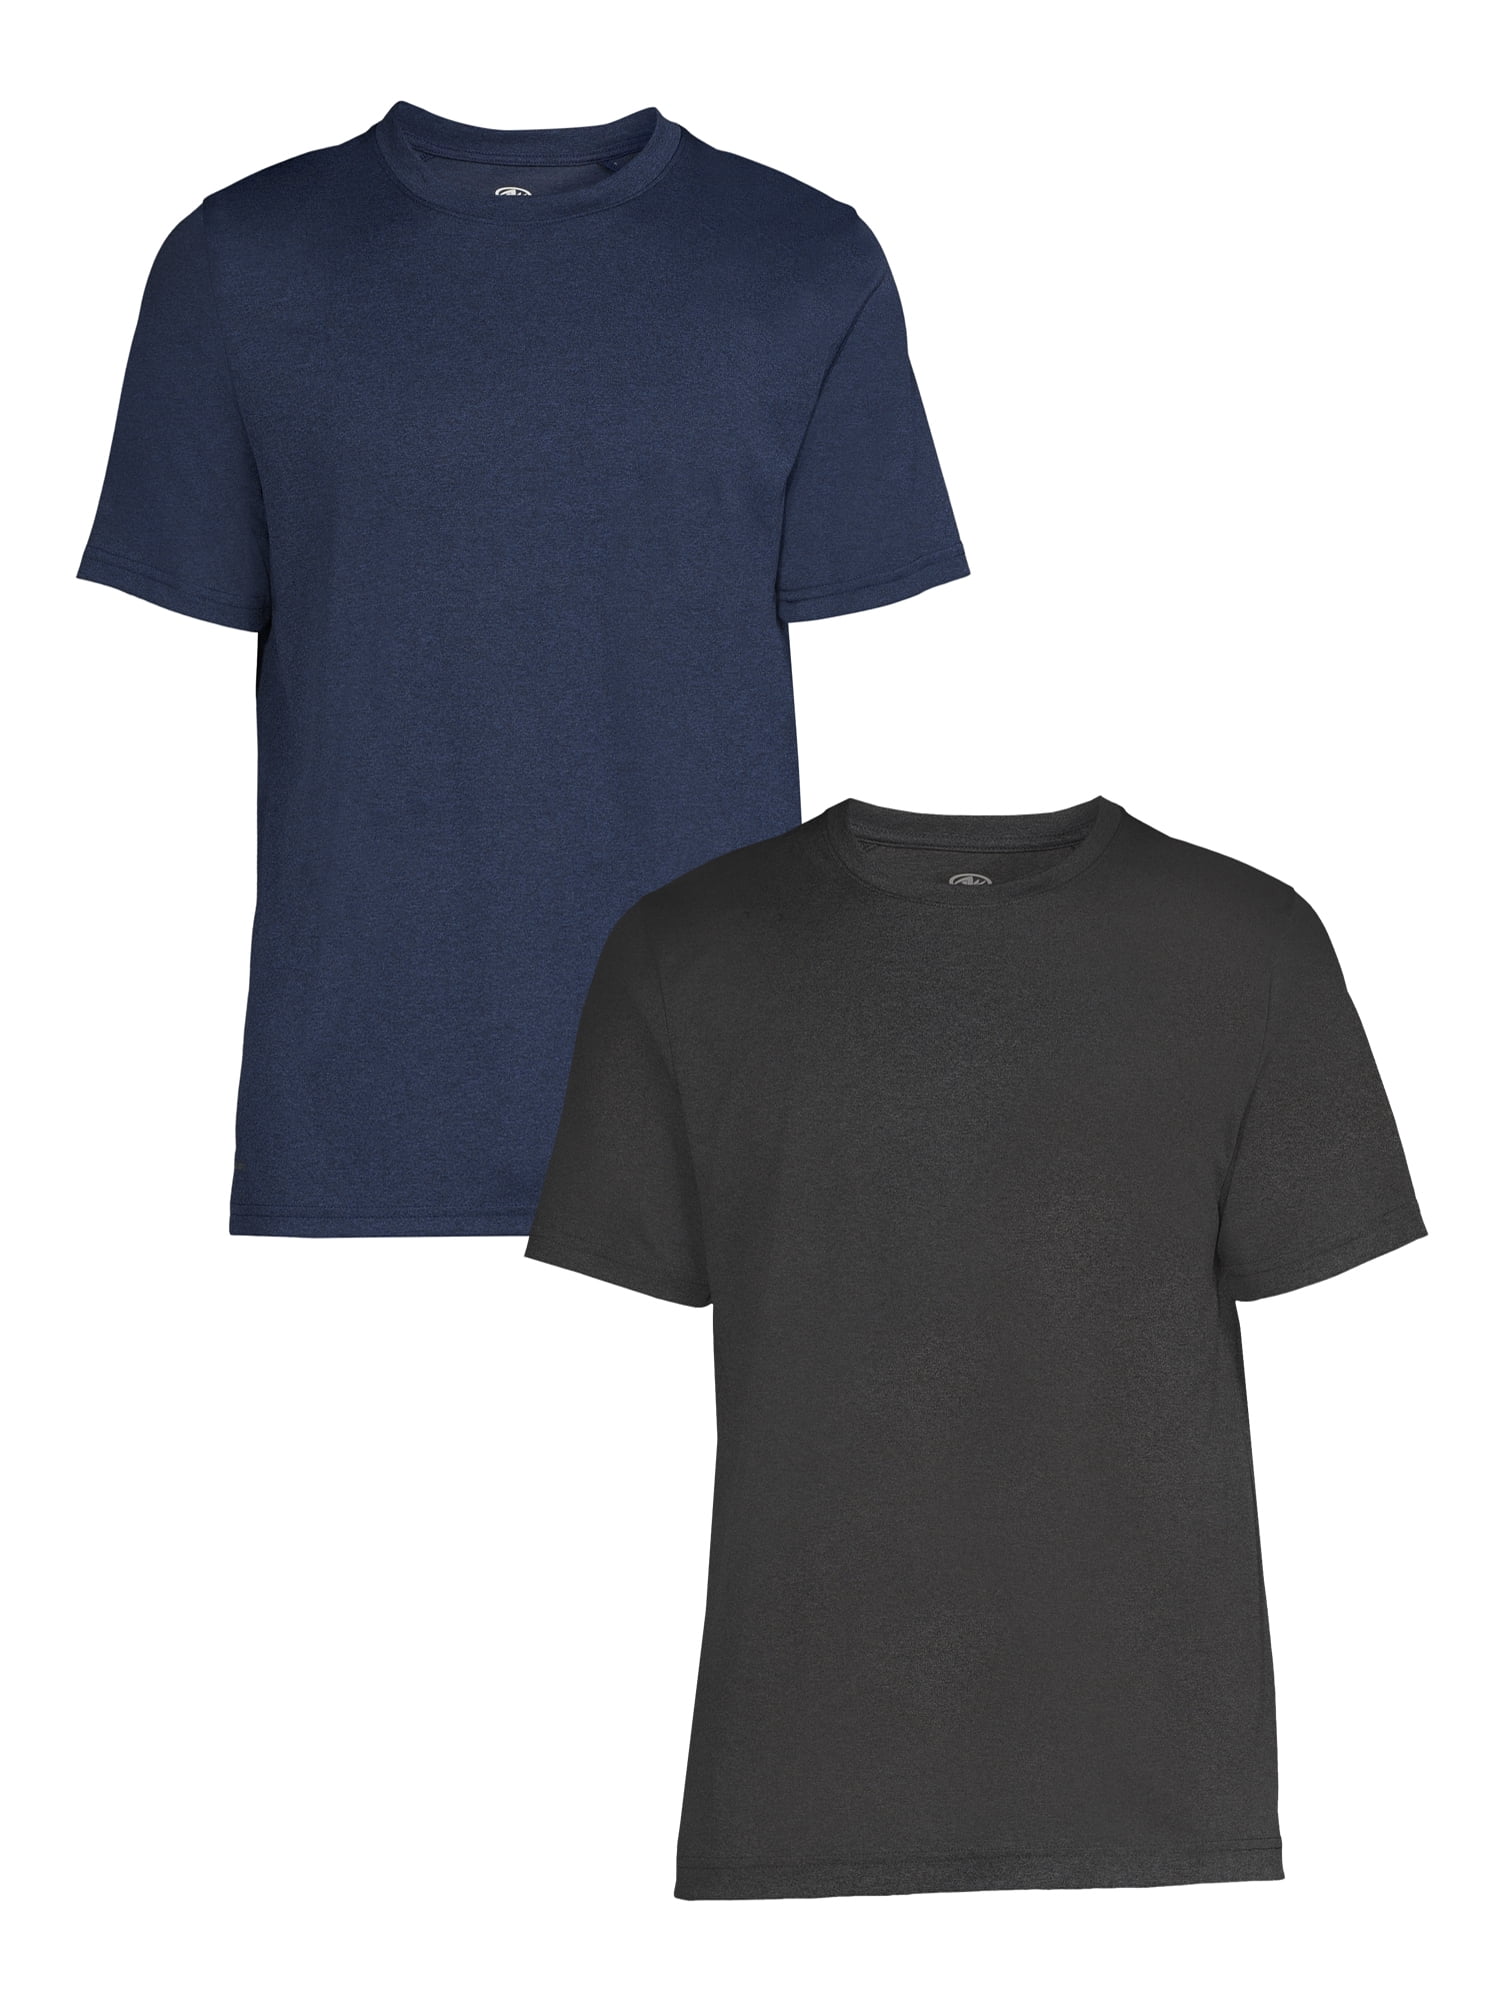 Athletic Works Men's & Big Men's Jersey Tee Shirt 2 Pack, up to Size ...